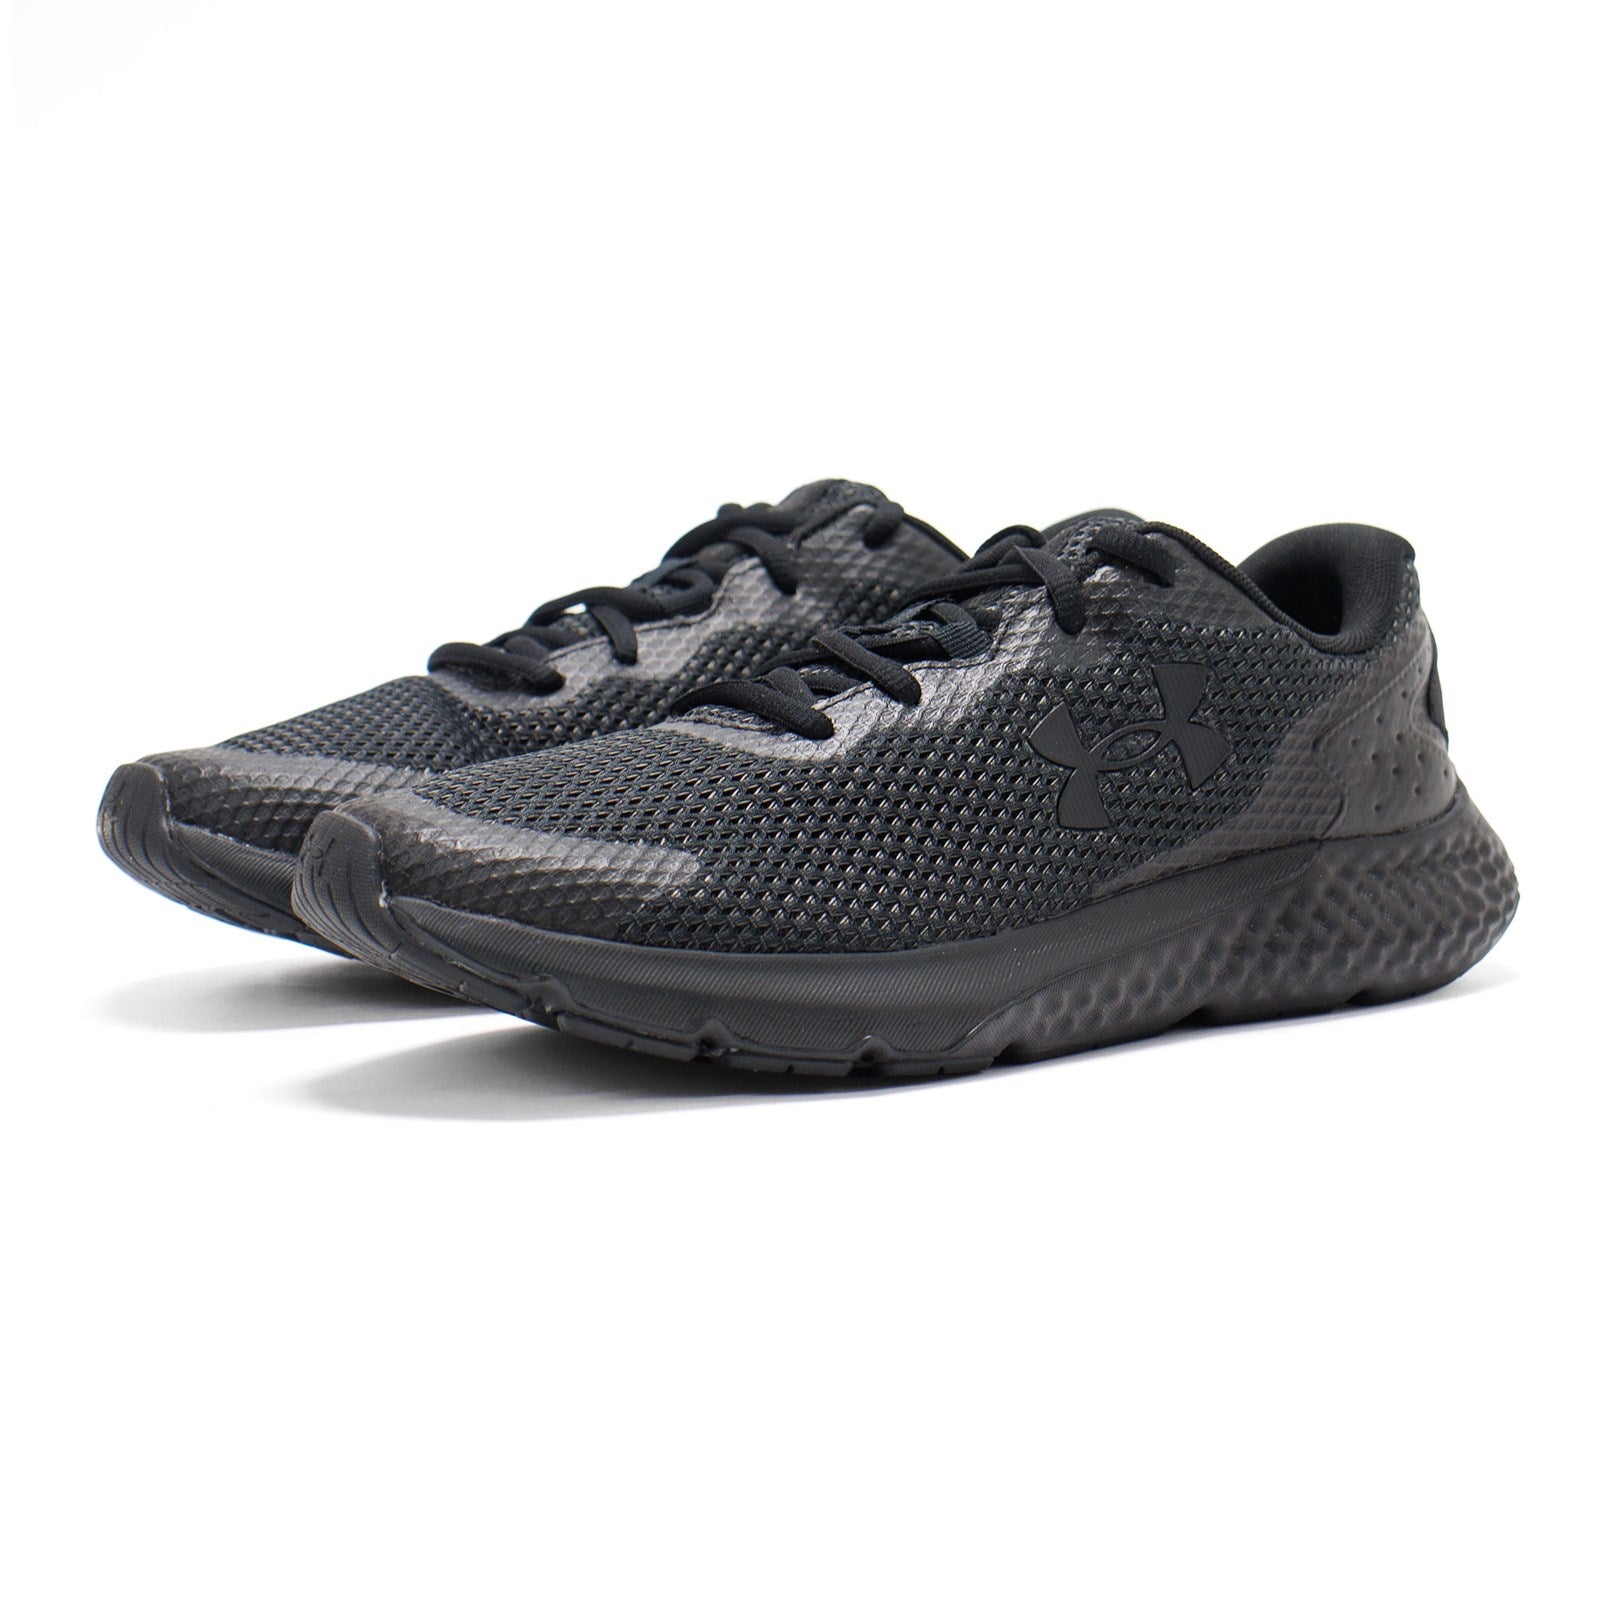 Under Armour Men Charged Rogue 3 Running Shoes